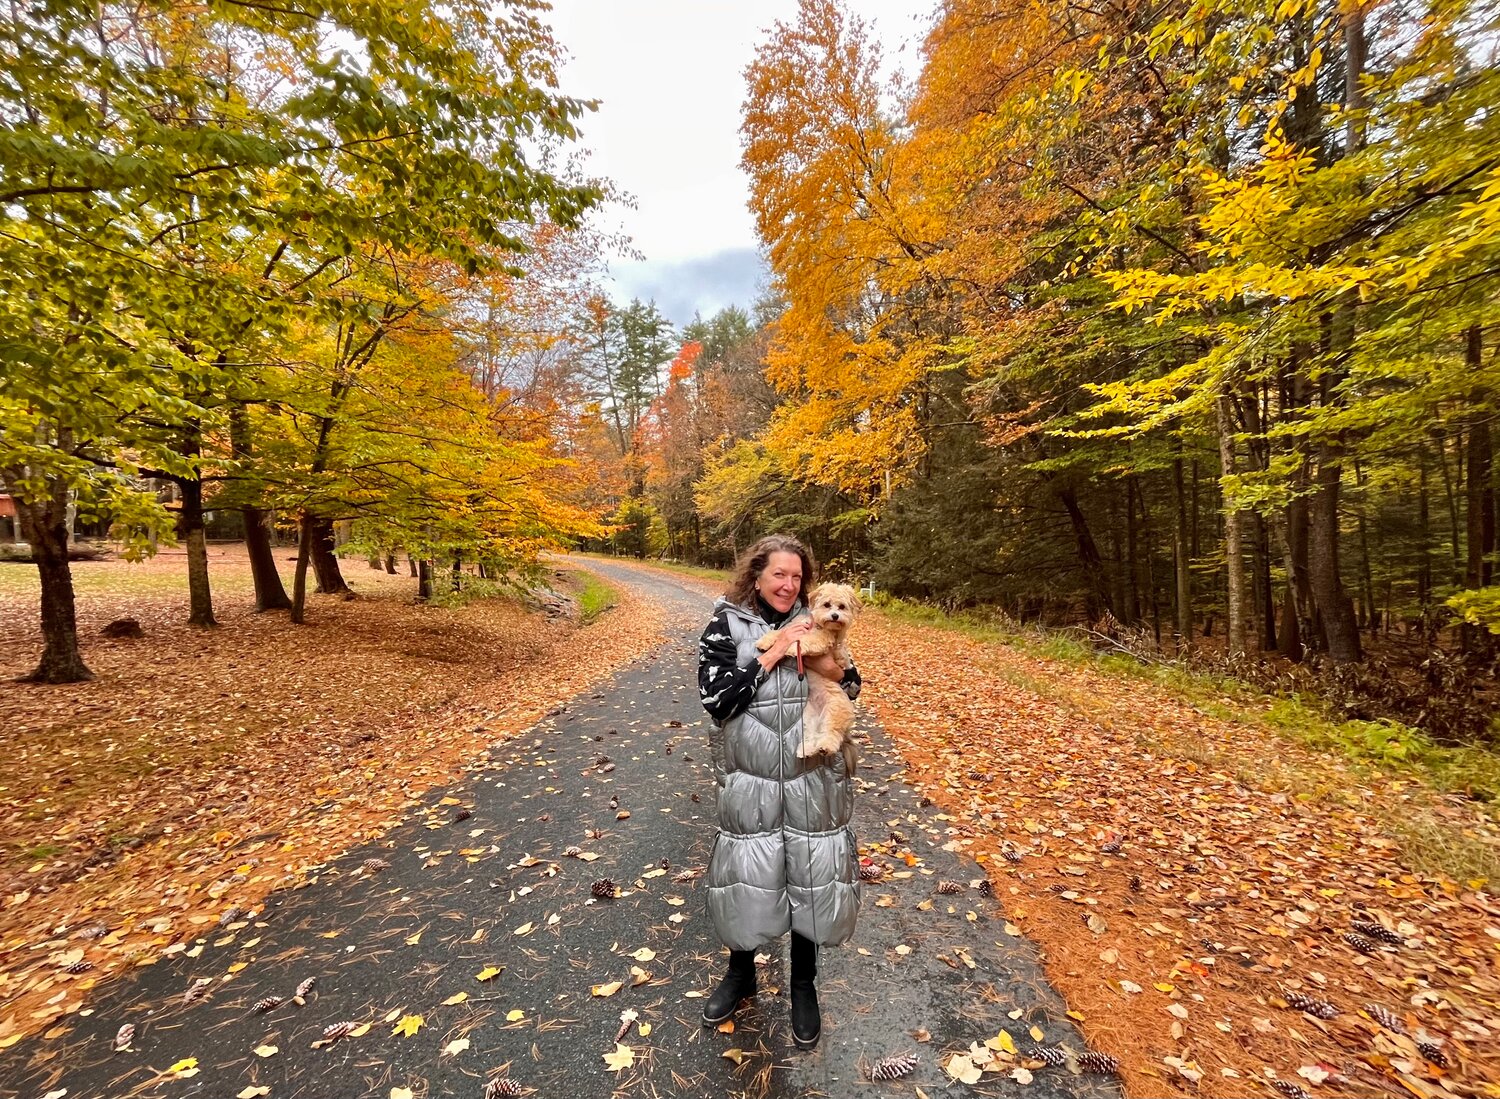 Due to my sports injury (LOL), I was tempted to dissuade college chum Adinah Alexander from visiting last weekend, but she wanted to catch the fall foliage in the Catskills, have a quick visit with me and meet That Dog Named Gidget. It hurt to take the photo, but I'm glad that I did.